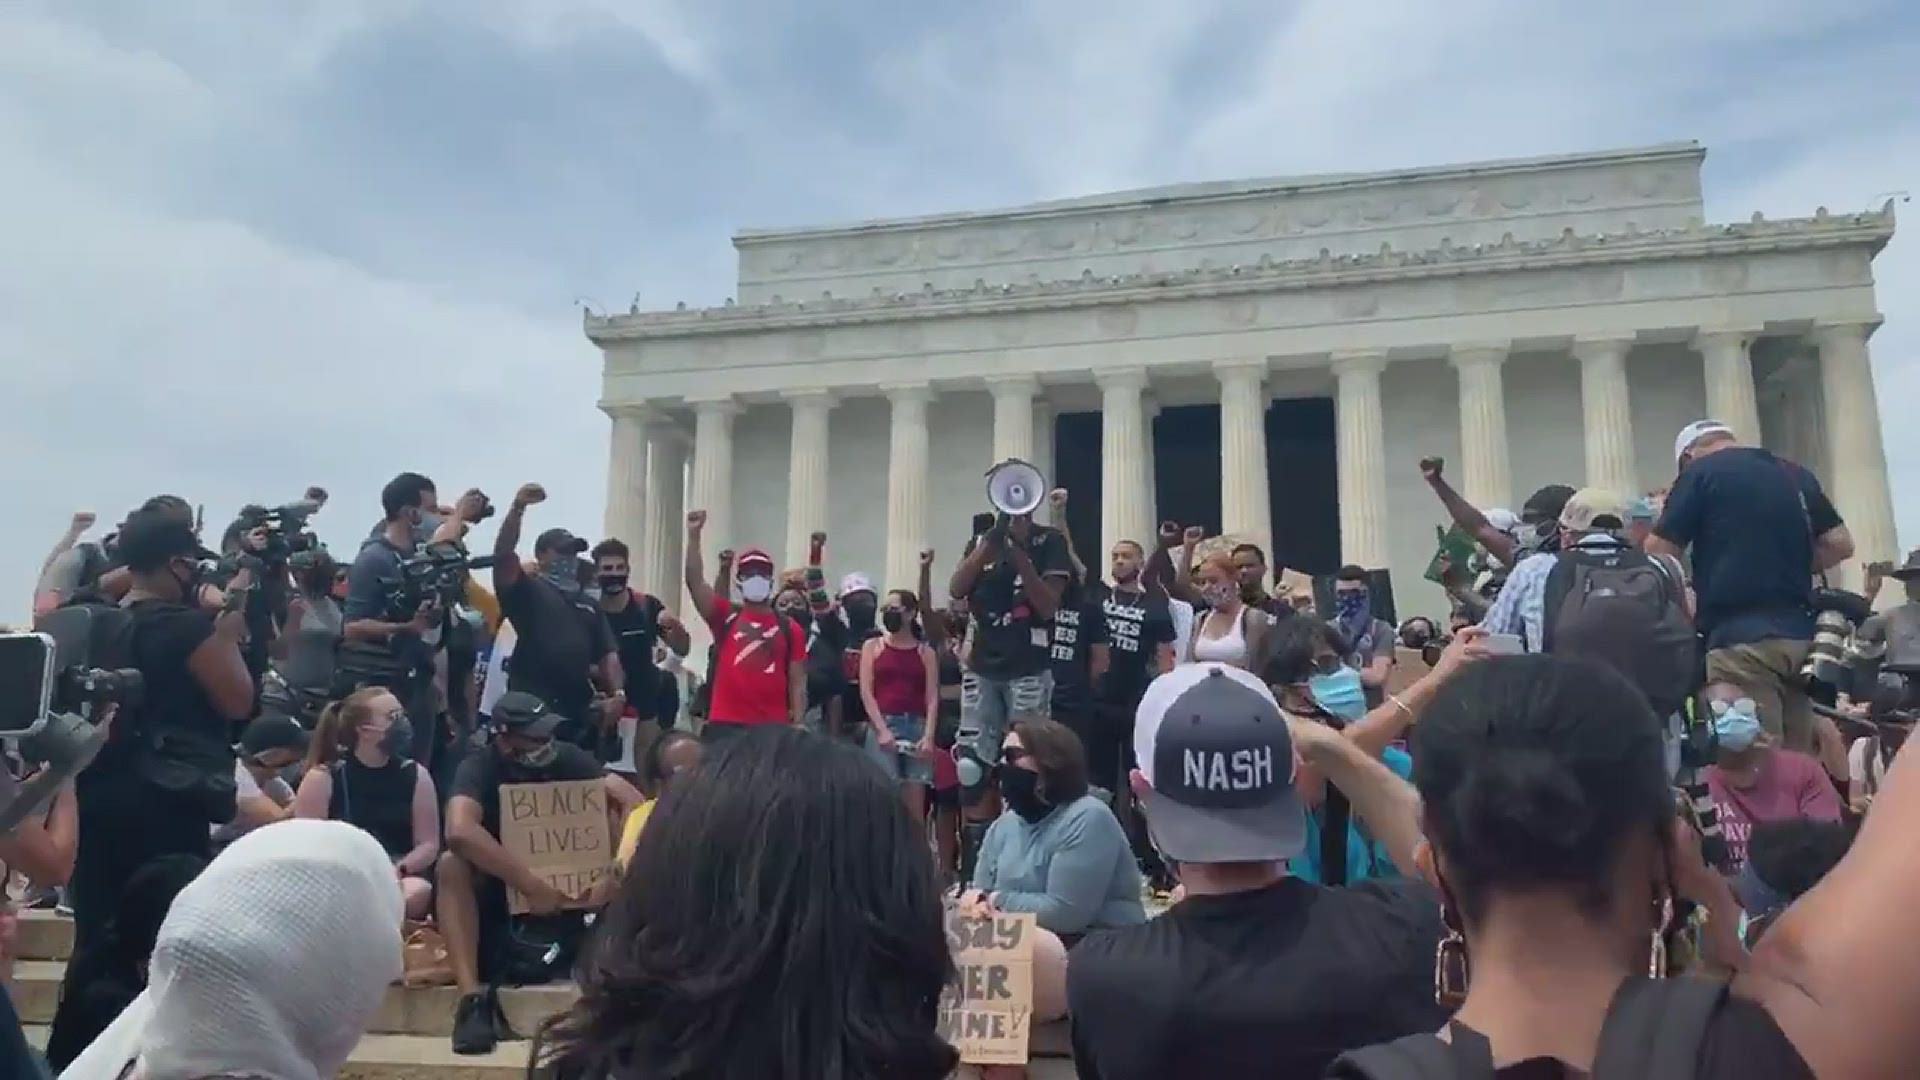 Protesters sing "Lift Every Voice and Sing" at the historic Lincoln Memorial in Washington, D.C.